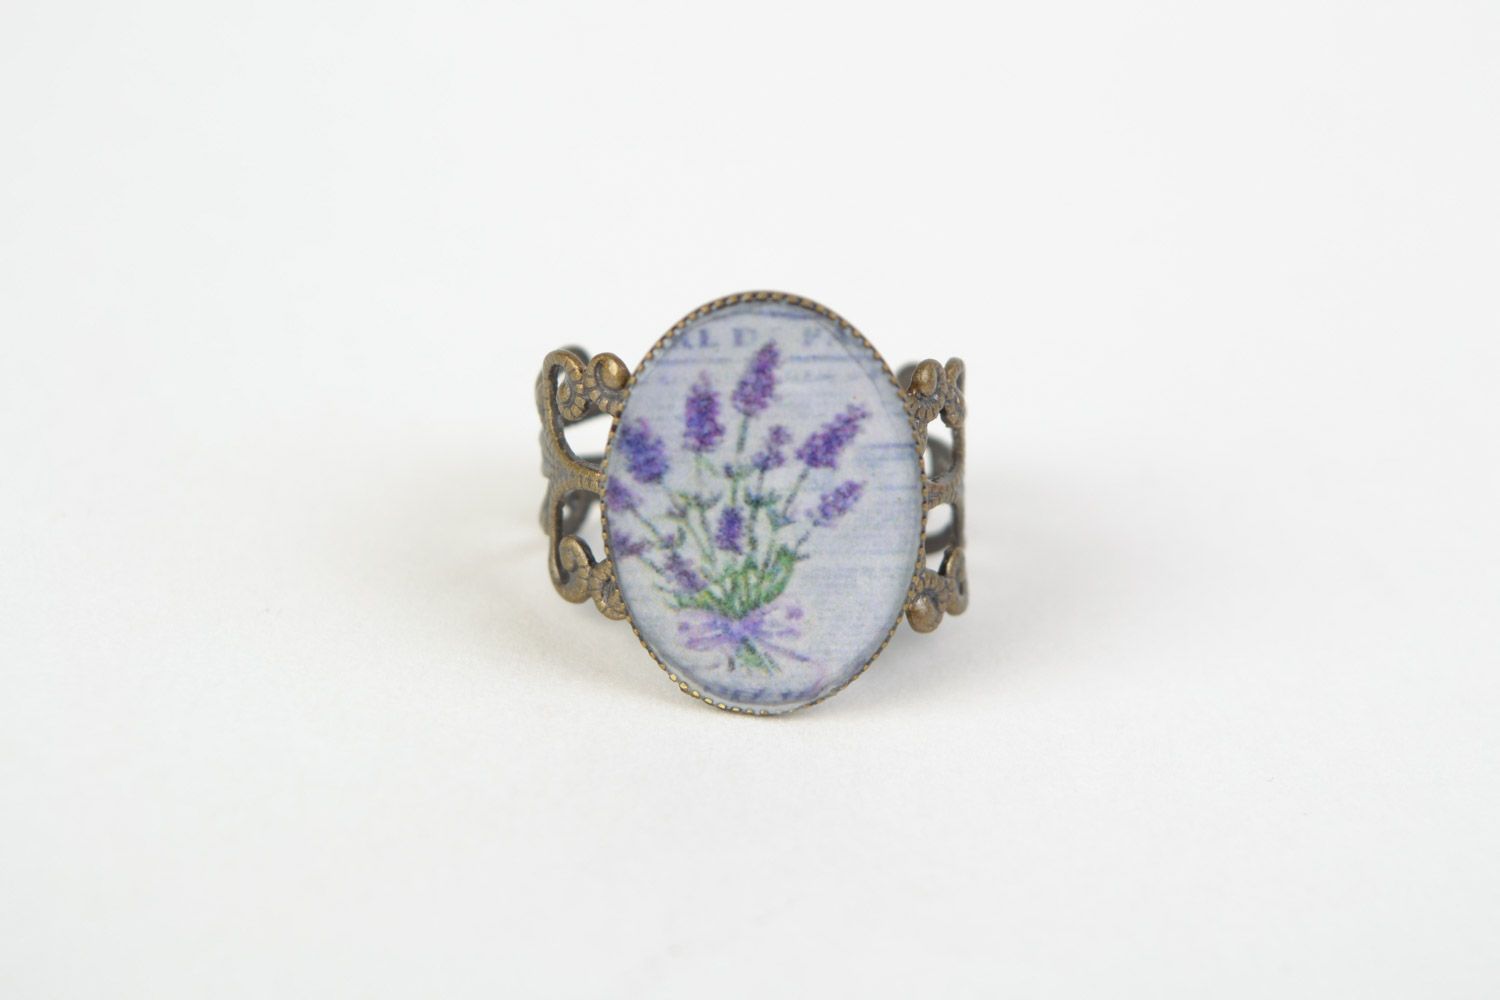 Handmade oval jewelry resin ring with lavender image photo 1